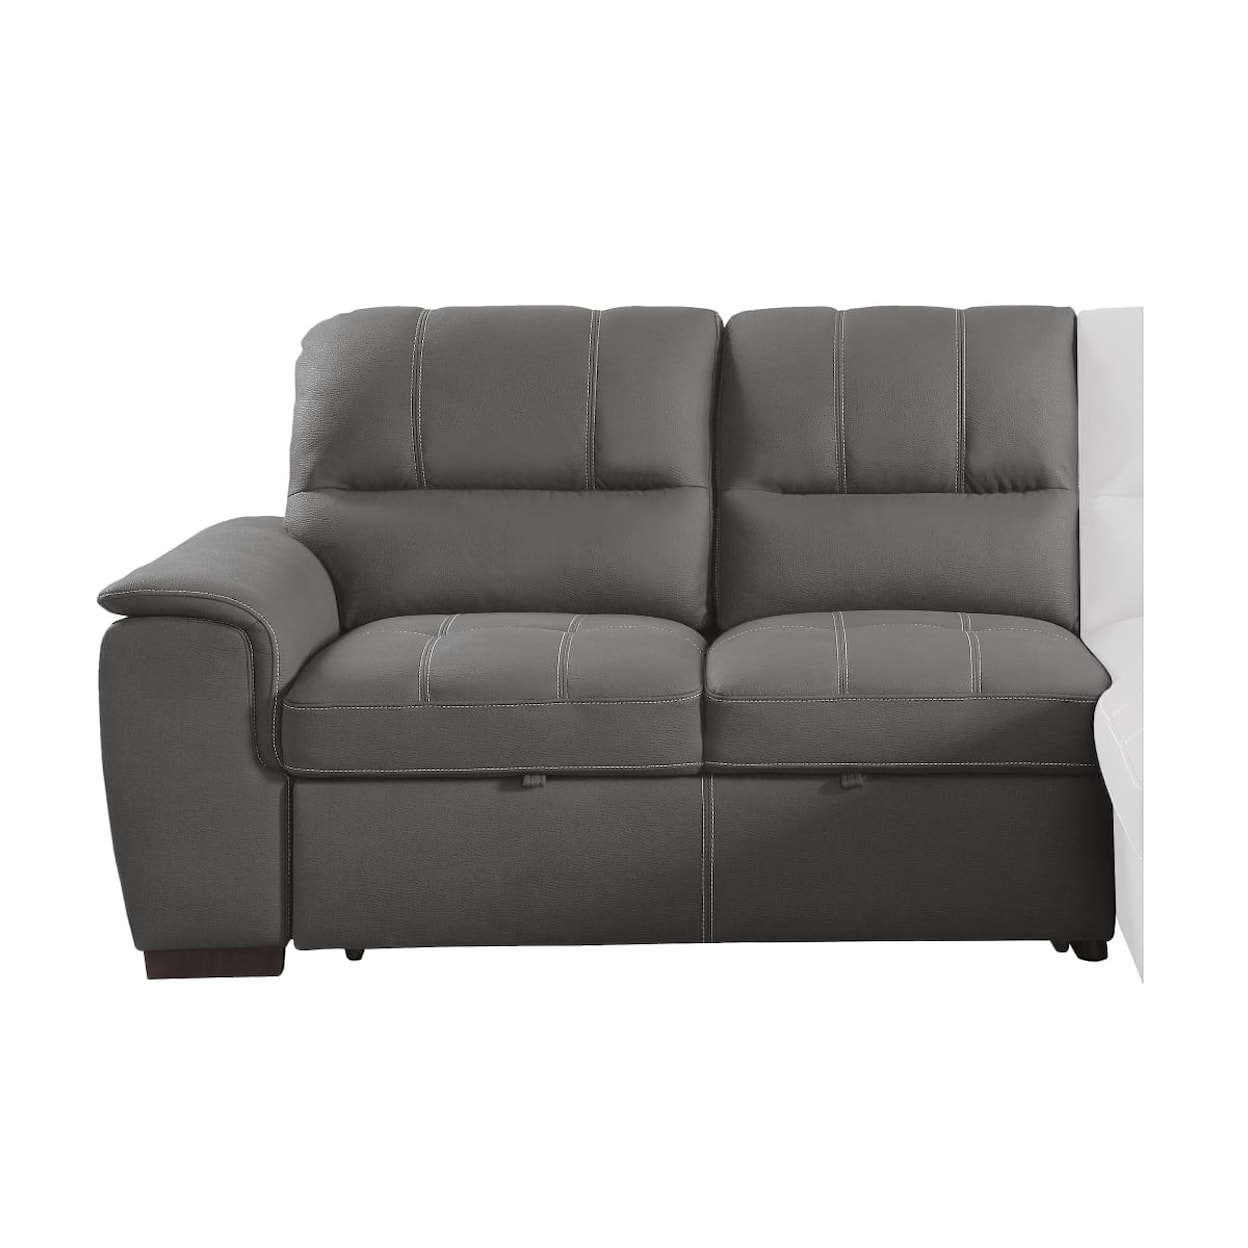 Homelegance Furniture Andes 2-Piece Sectional Sofa